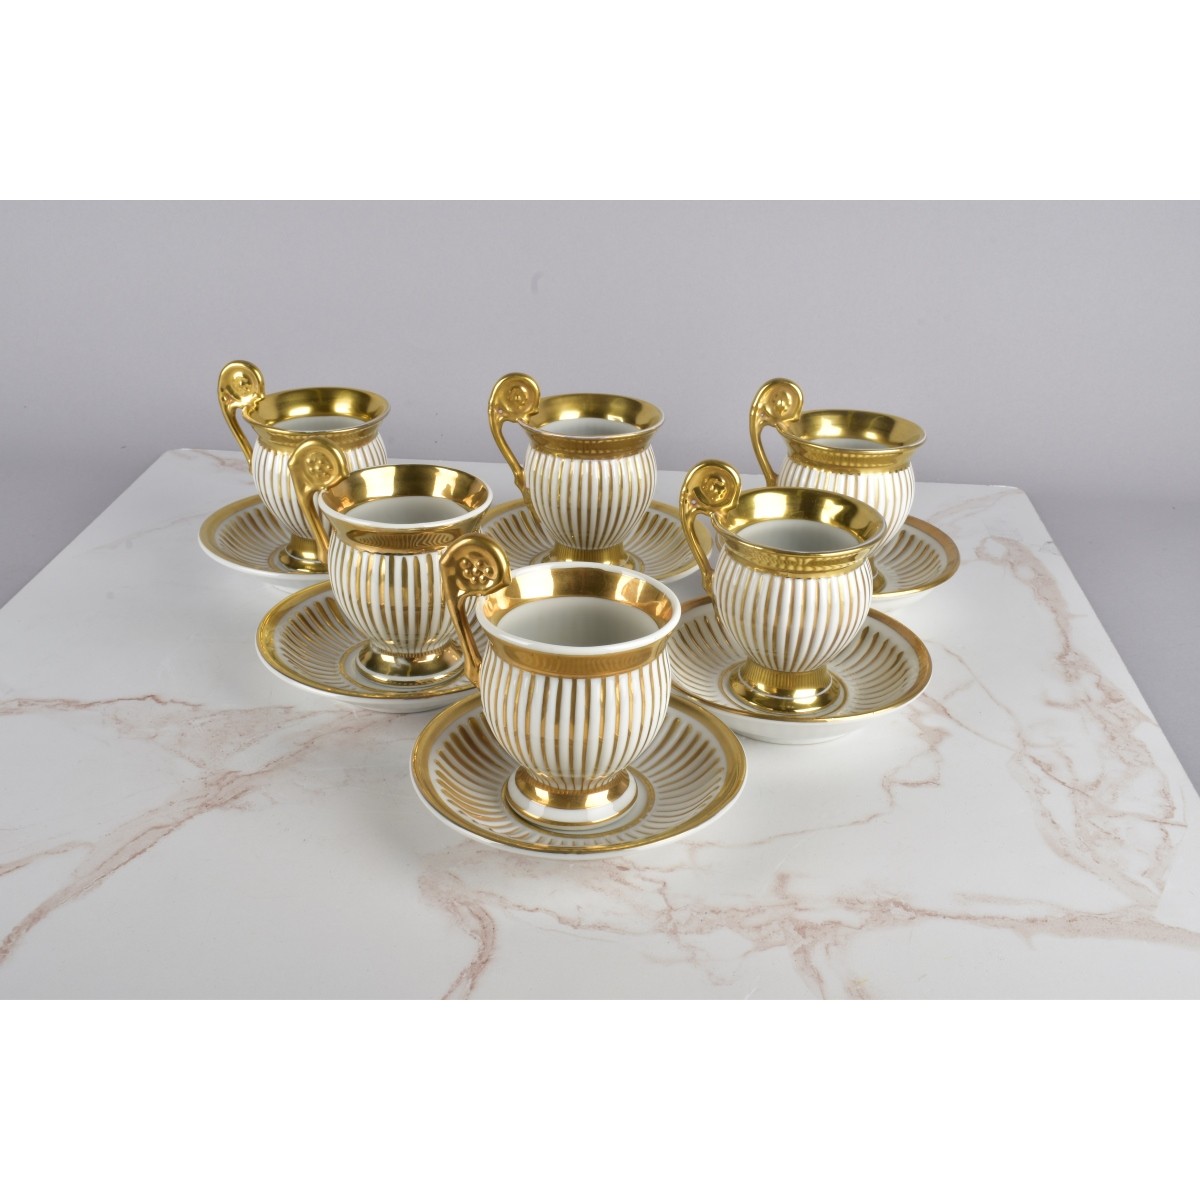 RPM Porcelain Cups and Saucers